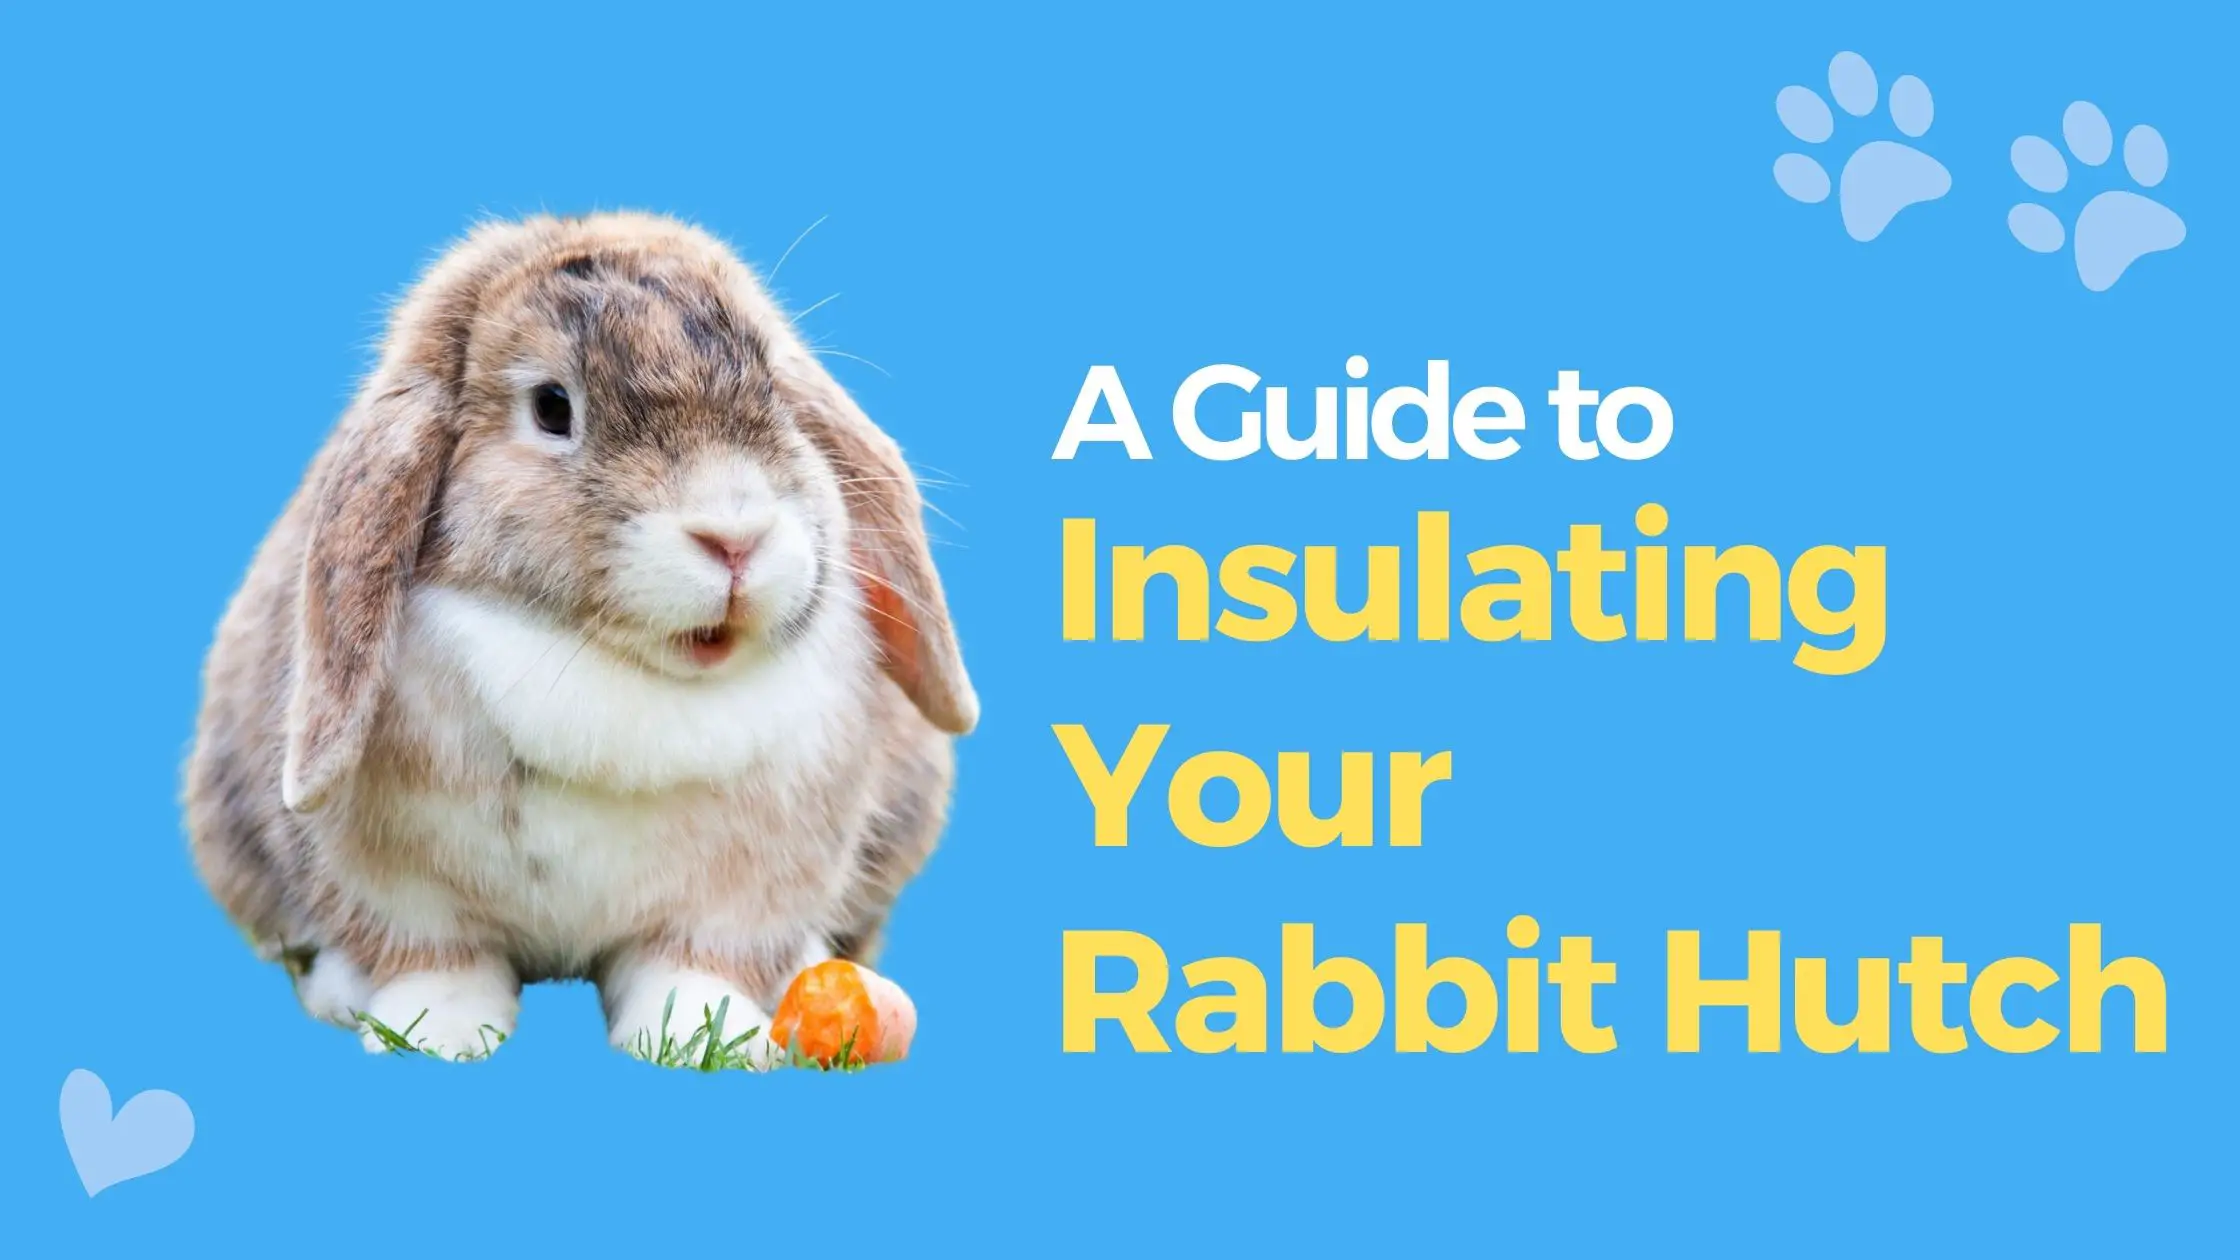 A Guide to Insulating Your Rabbit Hutch